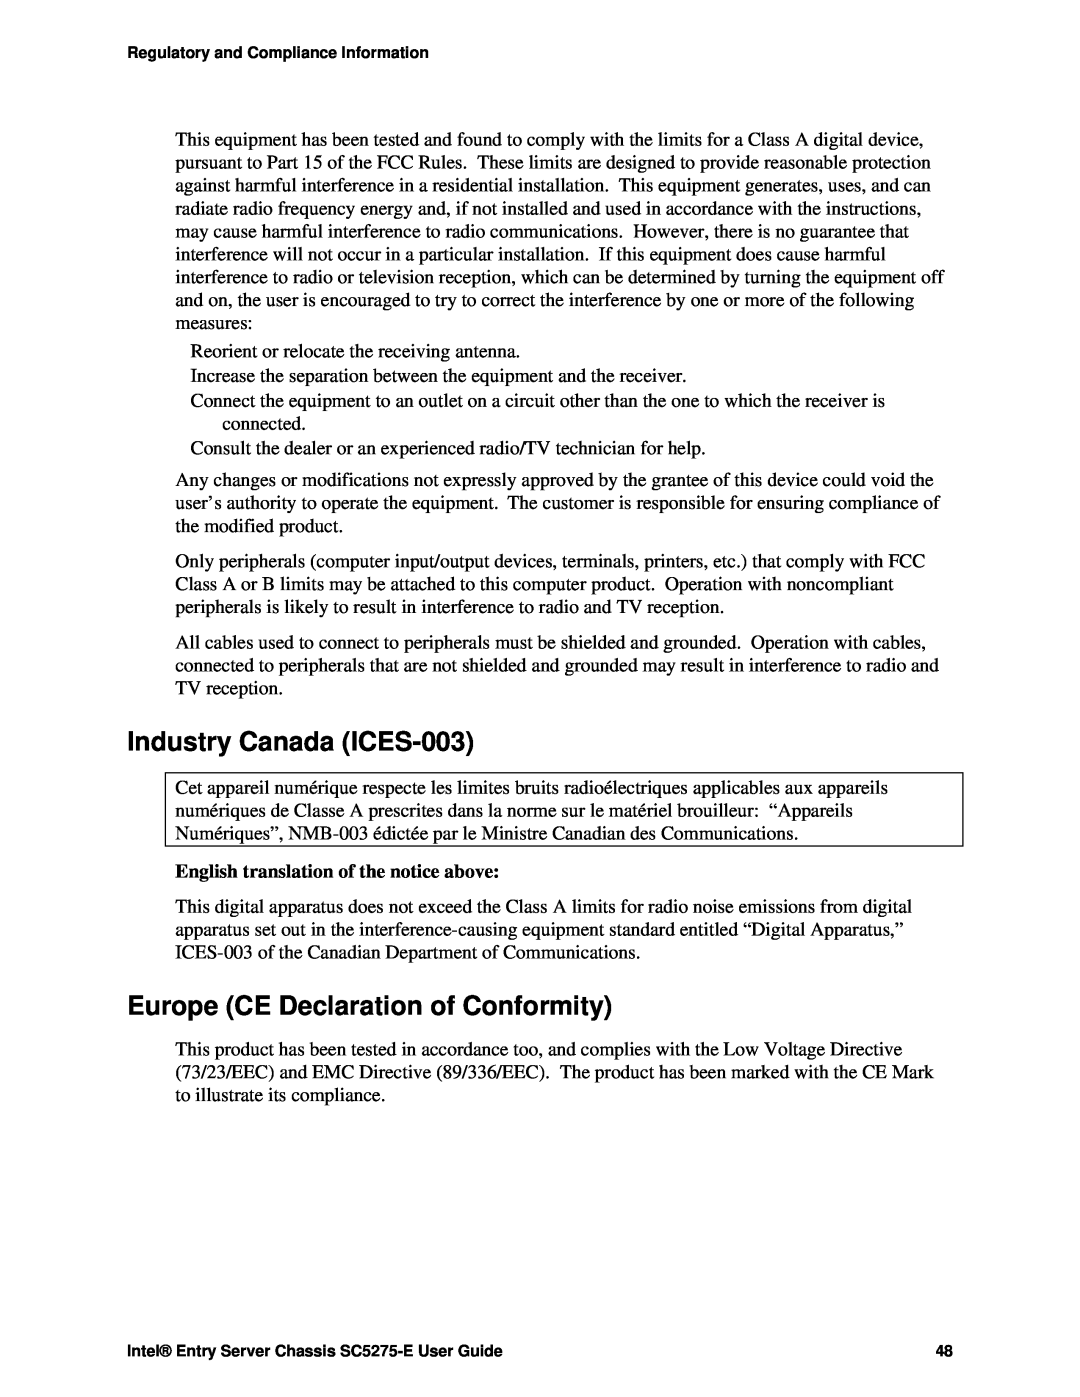 Intel SC5275-E Industry Canada ICES-003, Europe CE Declaration of Conformity, English translation of the notice above 